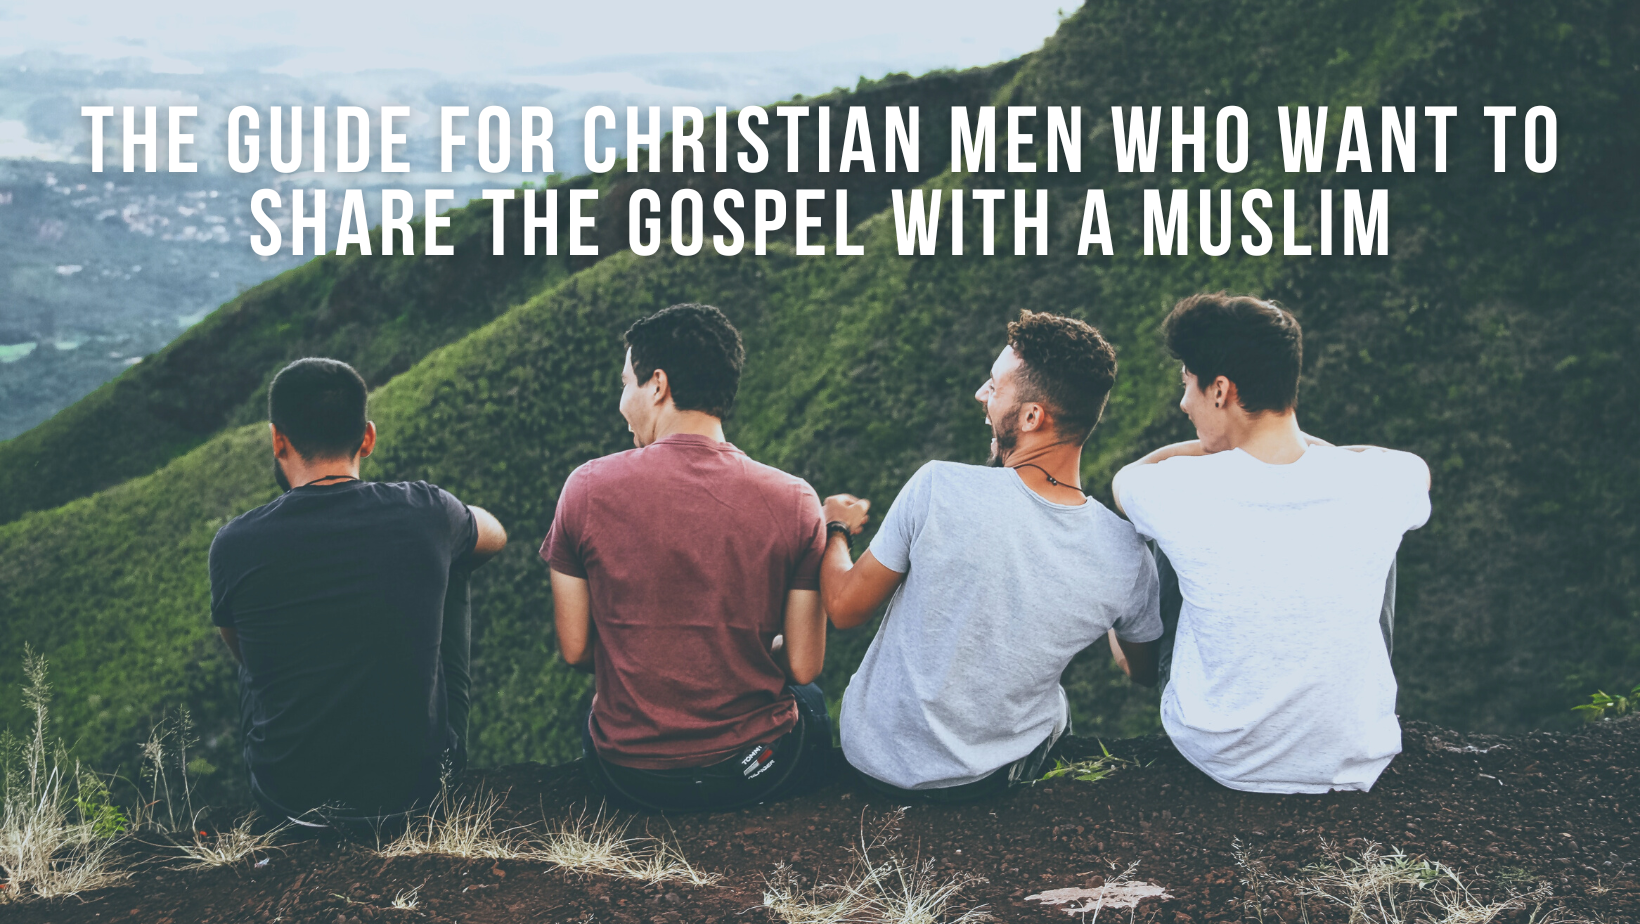 The Guide for Christian Men who want to share the gospel with a Muslim